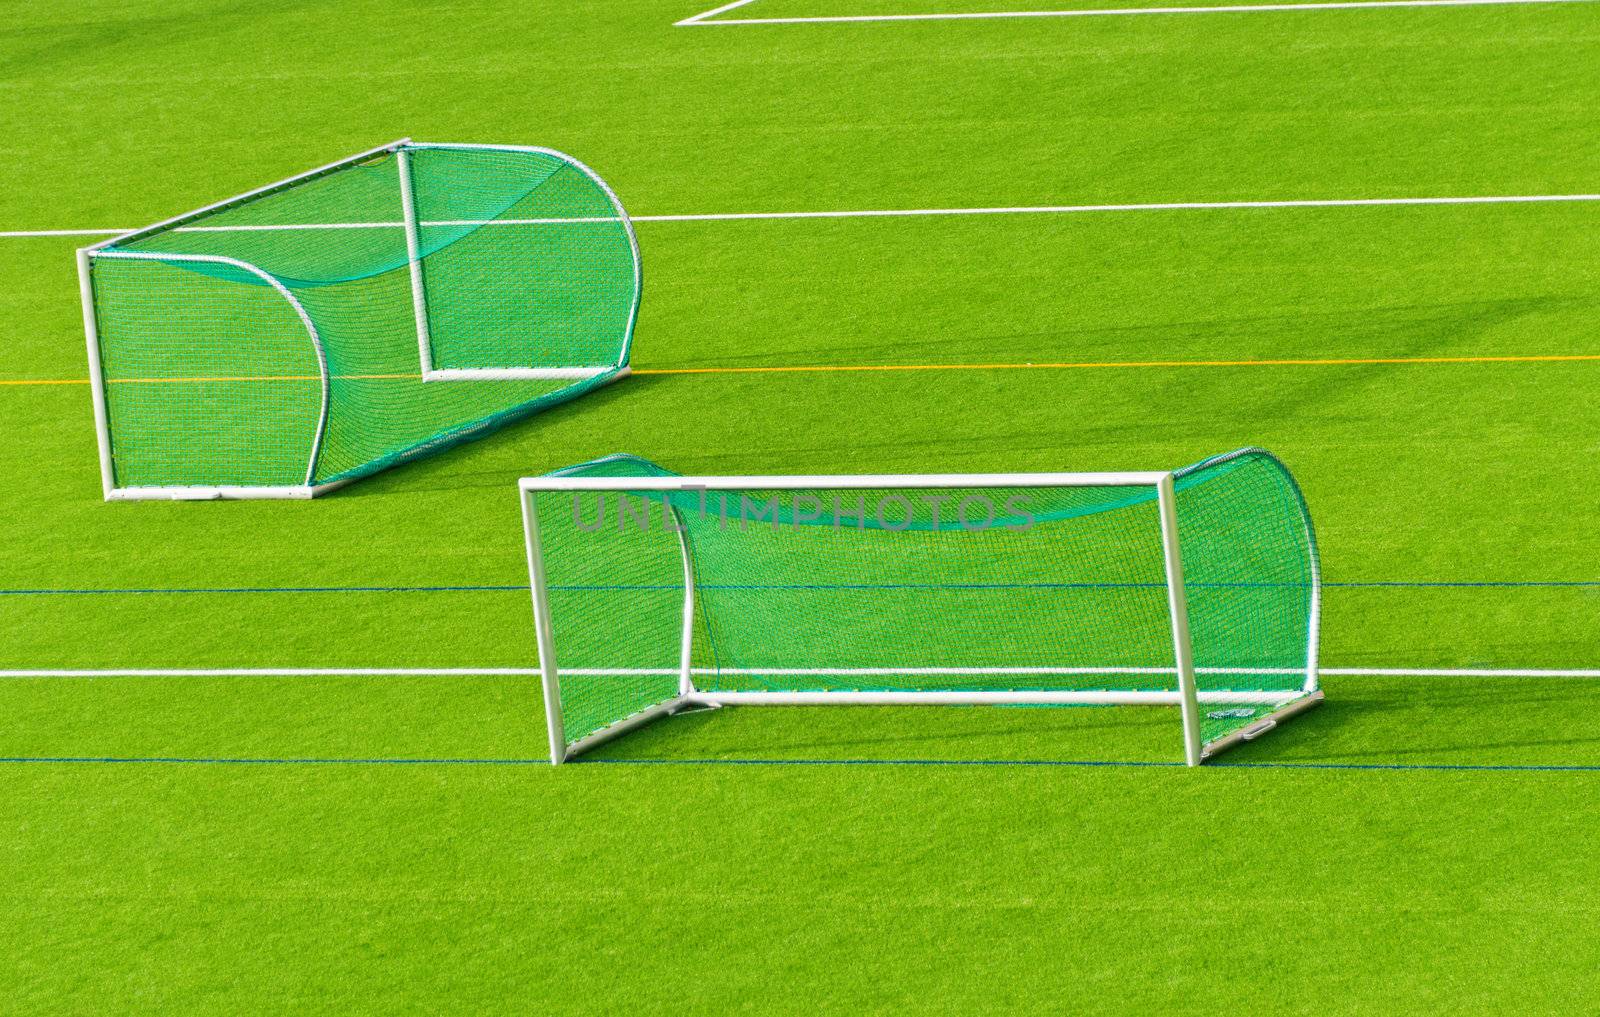 Football goals next to each other  on football field